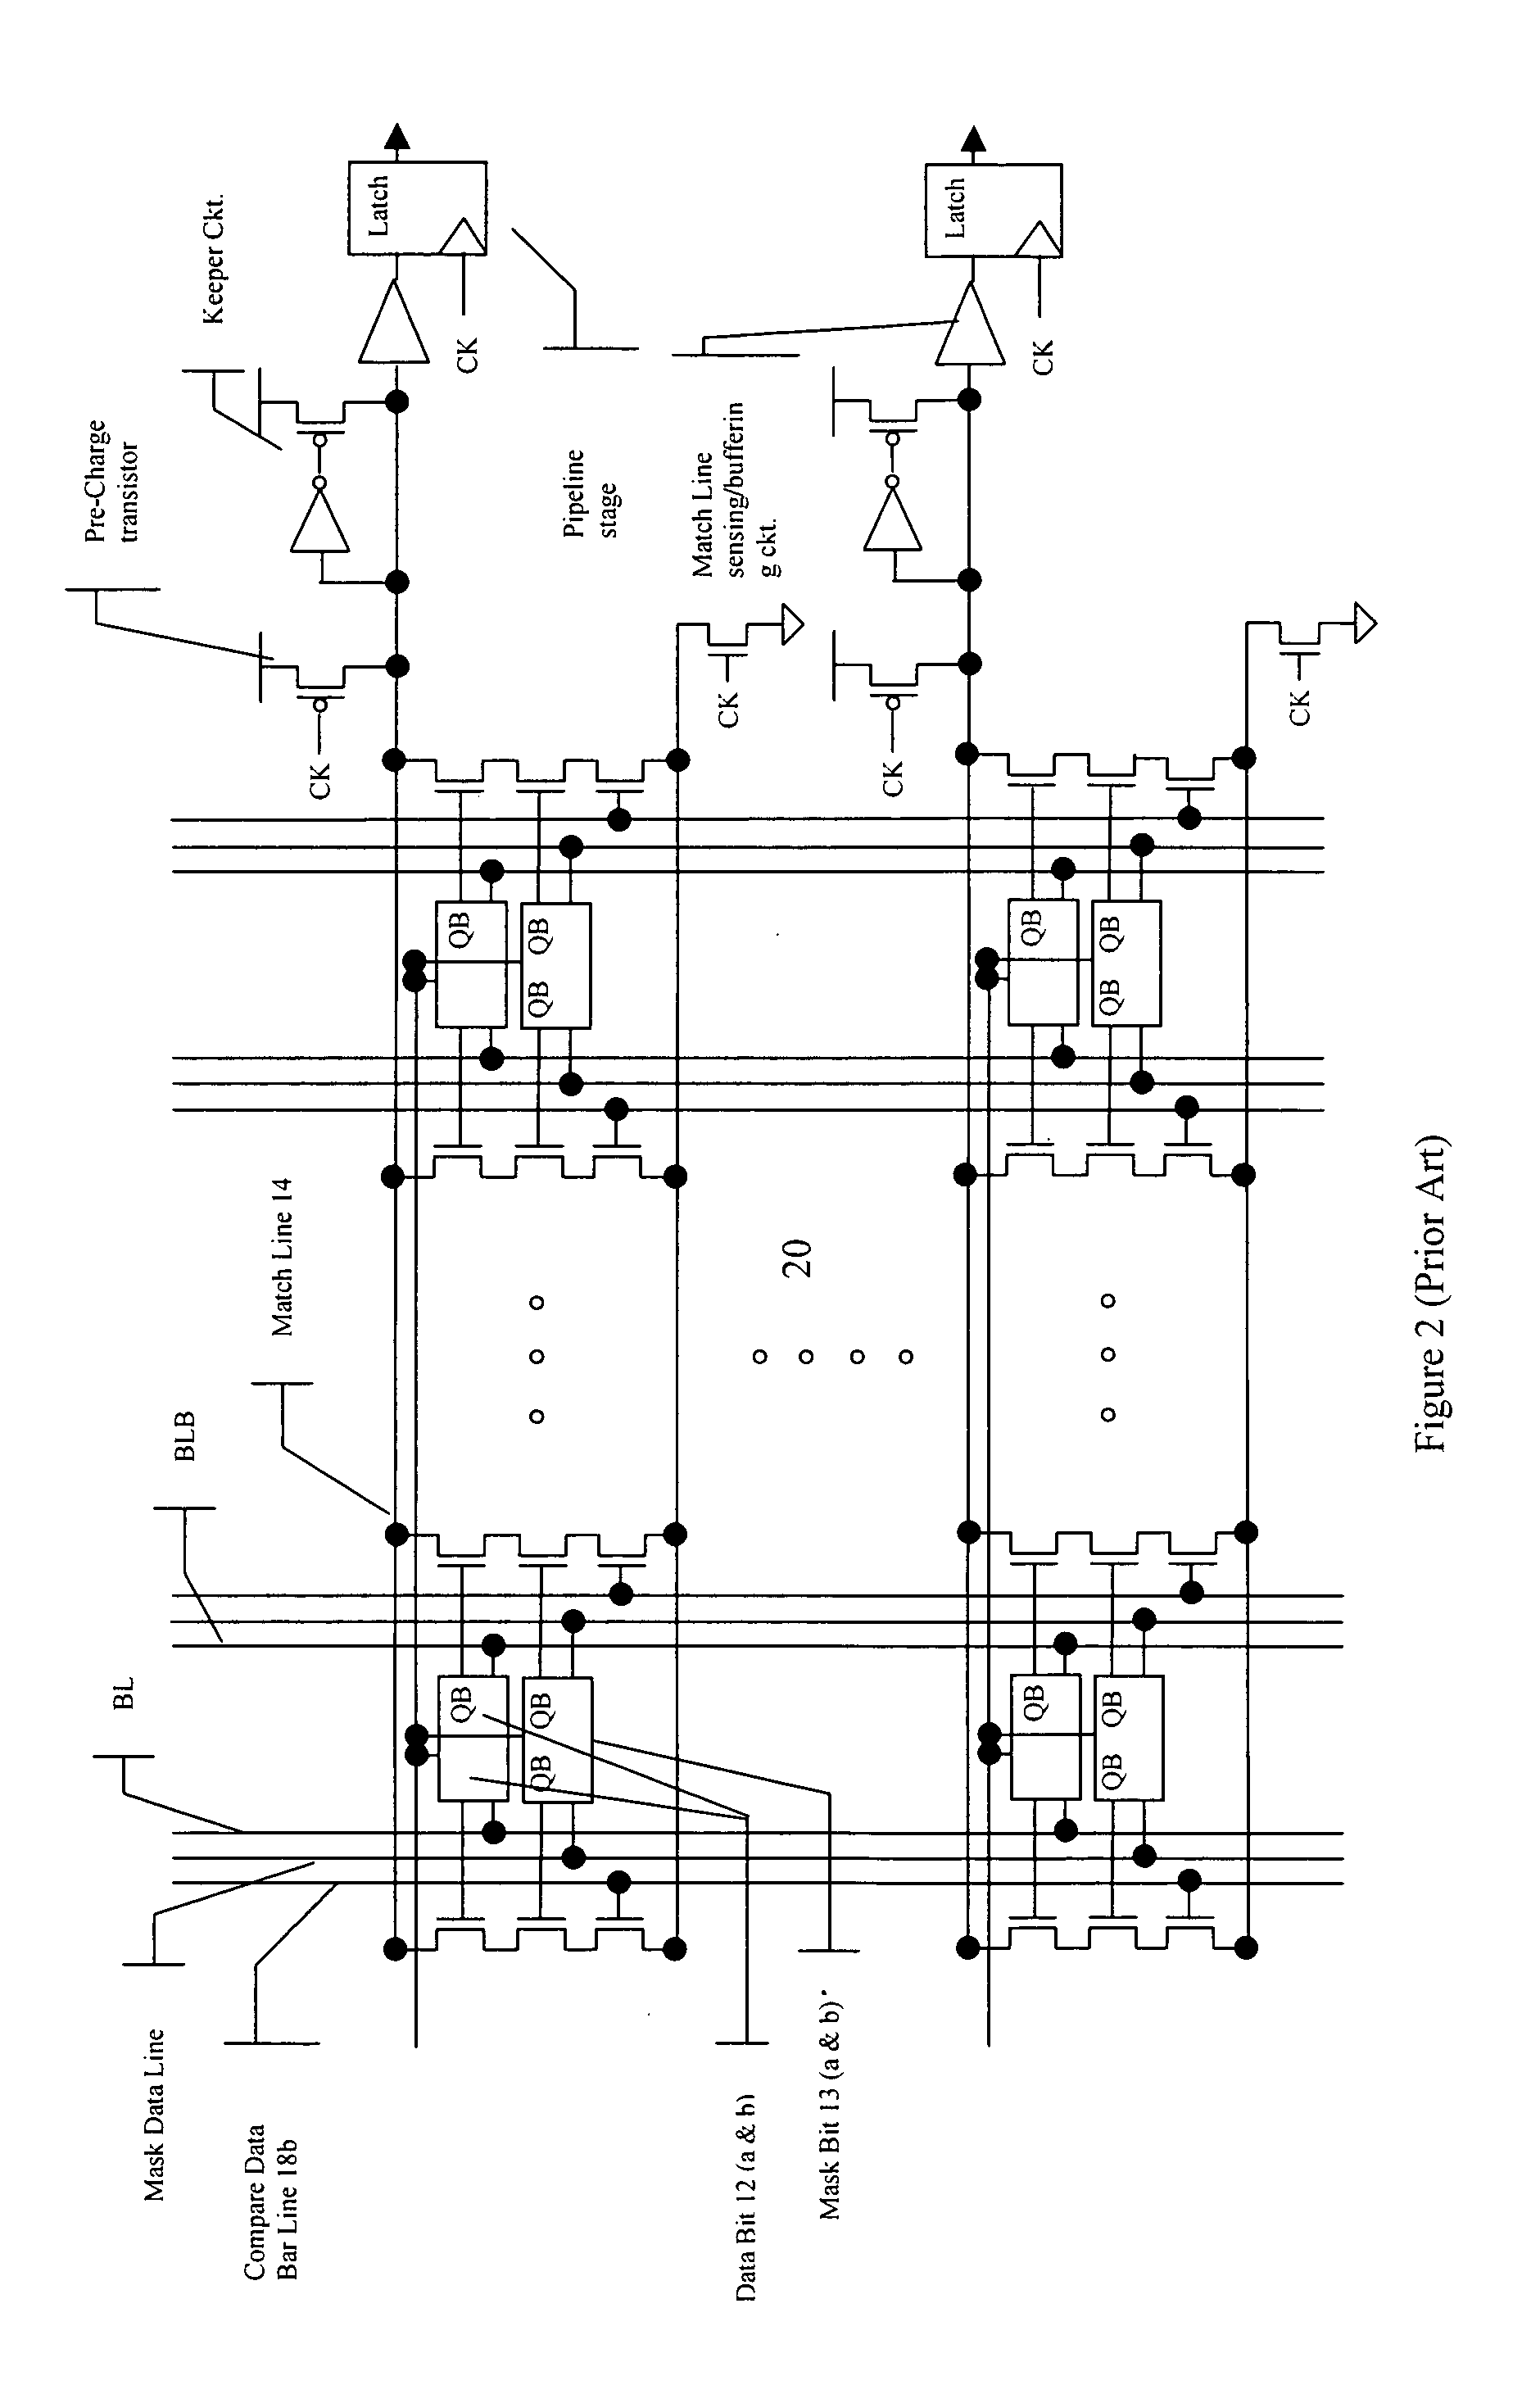 High-speed and low-power differential non-volatile content addressable memory cell and array